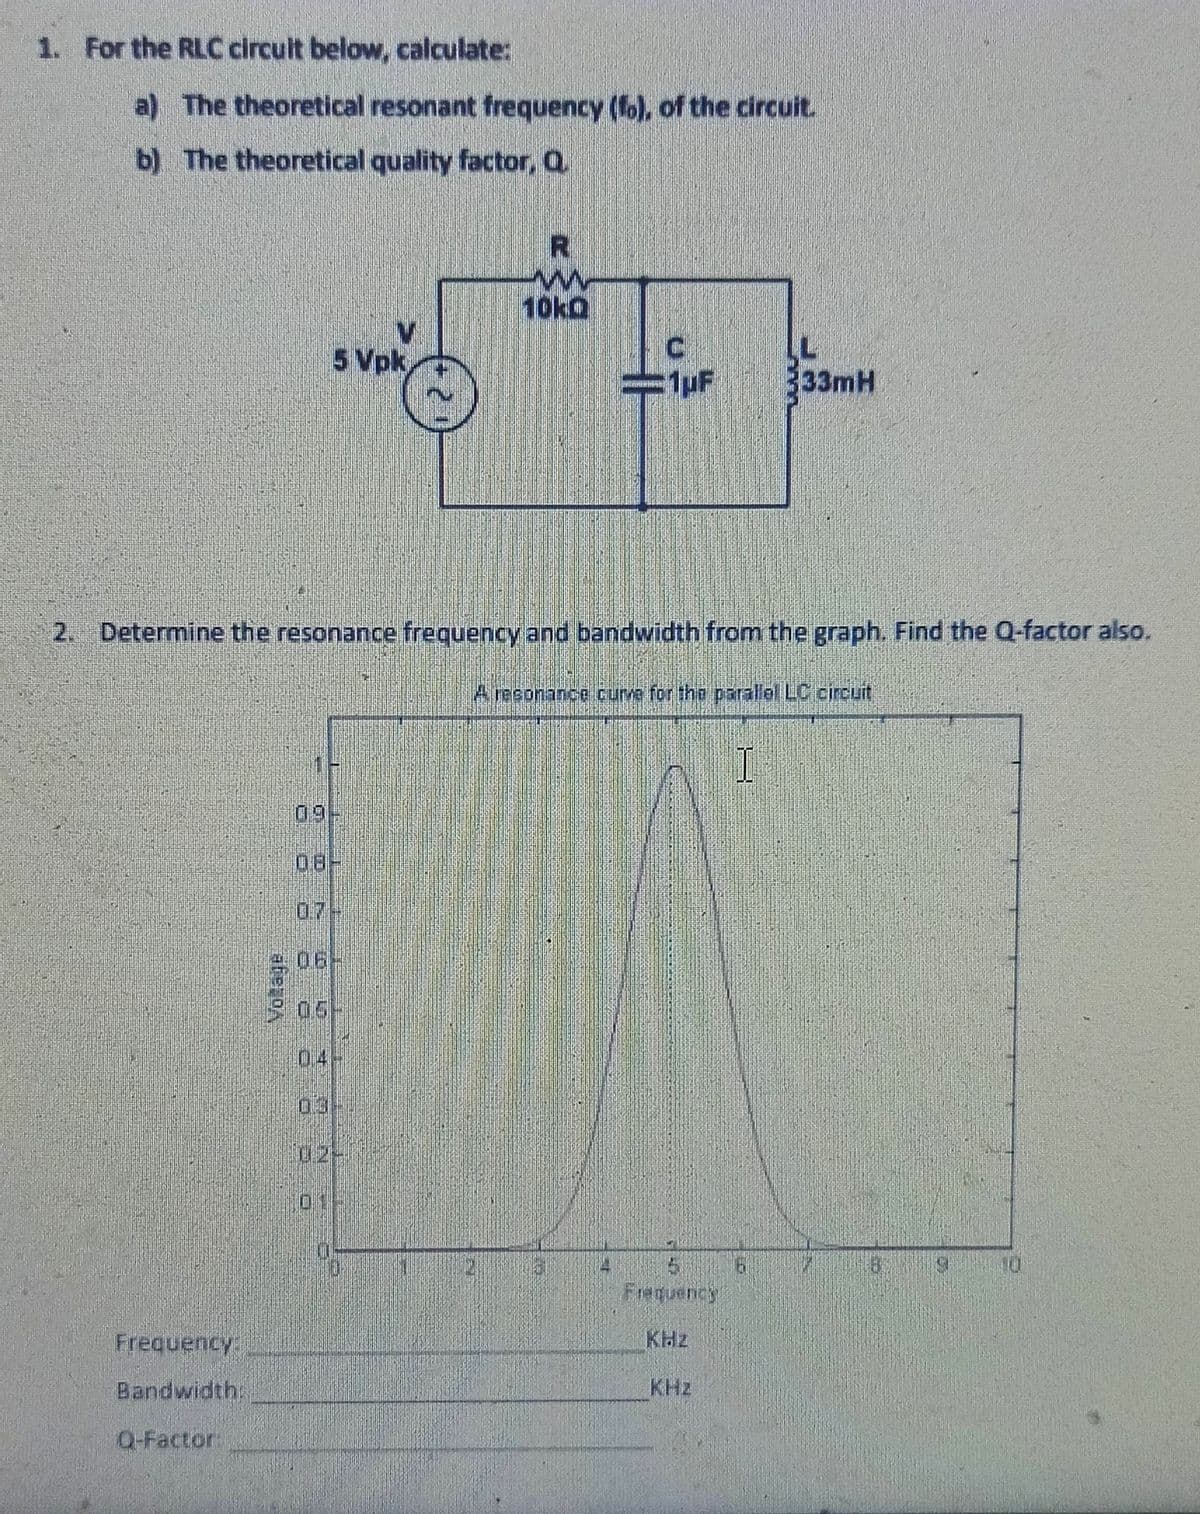 1. For the RLC circult below, calculate:
a) The theoretical resonant frequency (f), of the circuit.
b) The theoretical quality factor, Q
10kQ
5 Vpk
333mH
2. Determine the resonance frequency and bandwidth from the graph. Find the Q-factor also.
A reeonance curve for thb parallel LC circuit
09
0.7
06-
05-
04
03
02-
10
Frequency
Frequency
KHz
Bandwidth.
KHz
Q-Factor:
Votage
